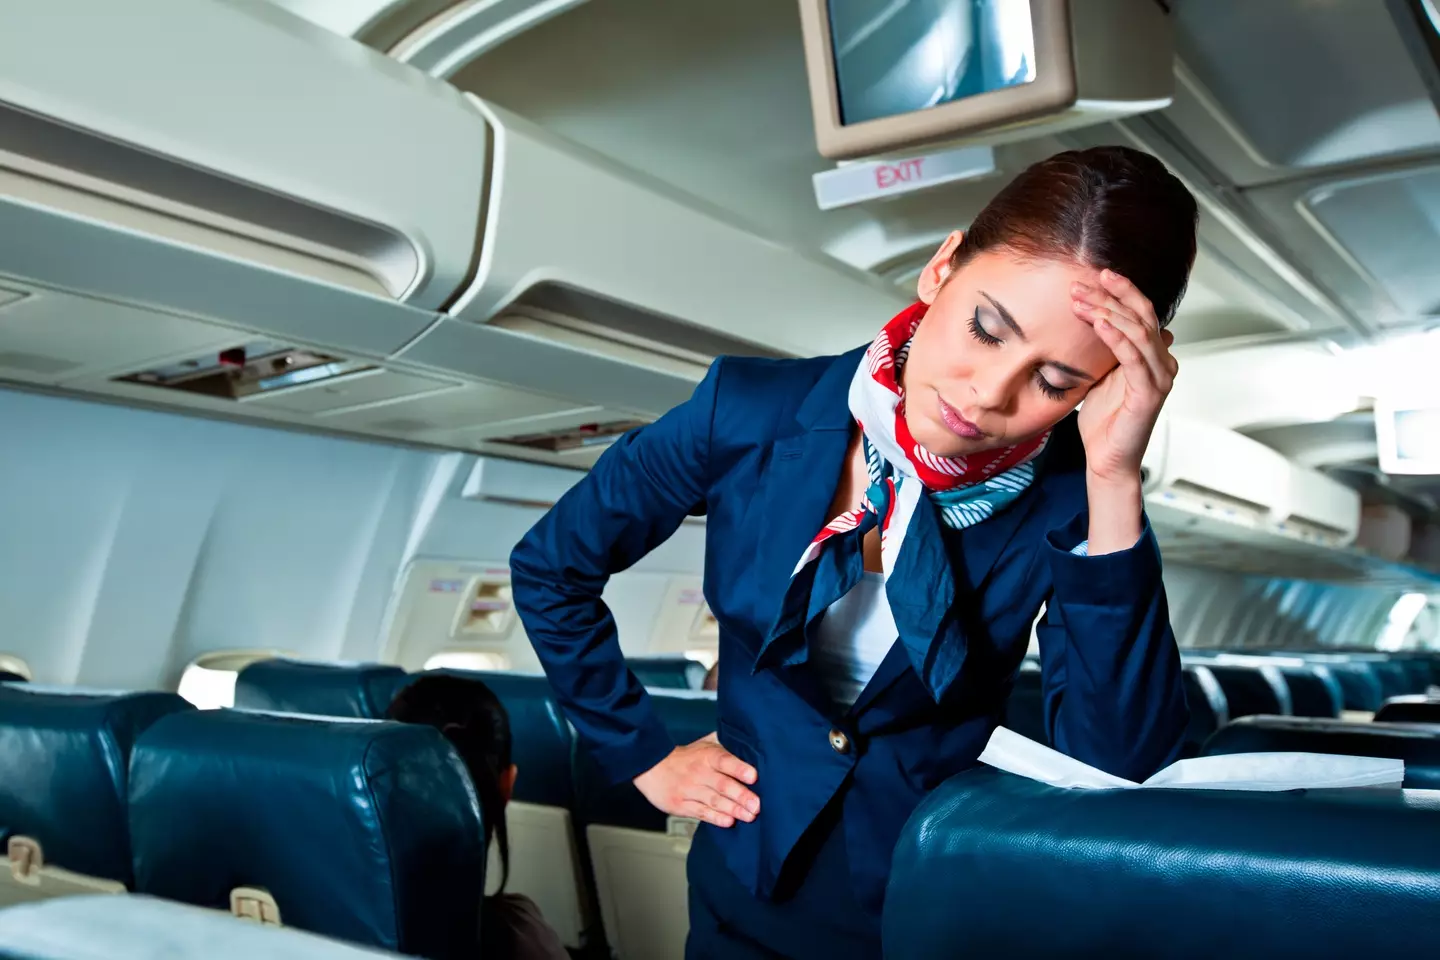 Here's a surefire way to get into your cabin crew's bad books.